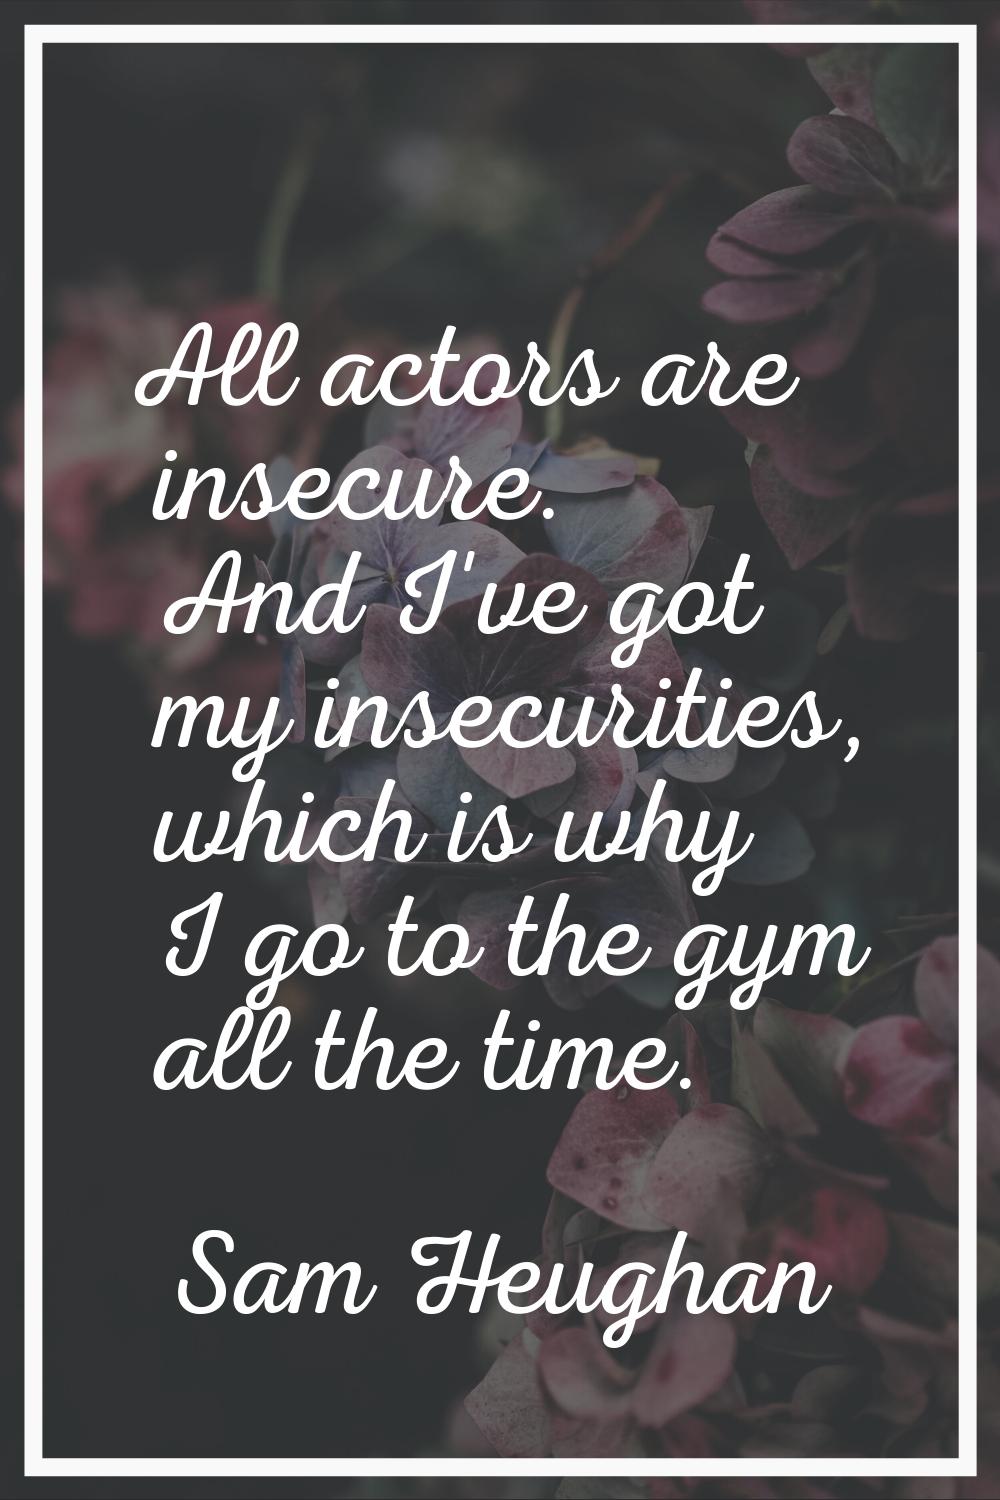 All actors are insecure. And I've got my insecurities, which is why I go to the gym all the time.